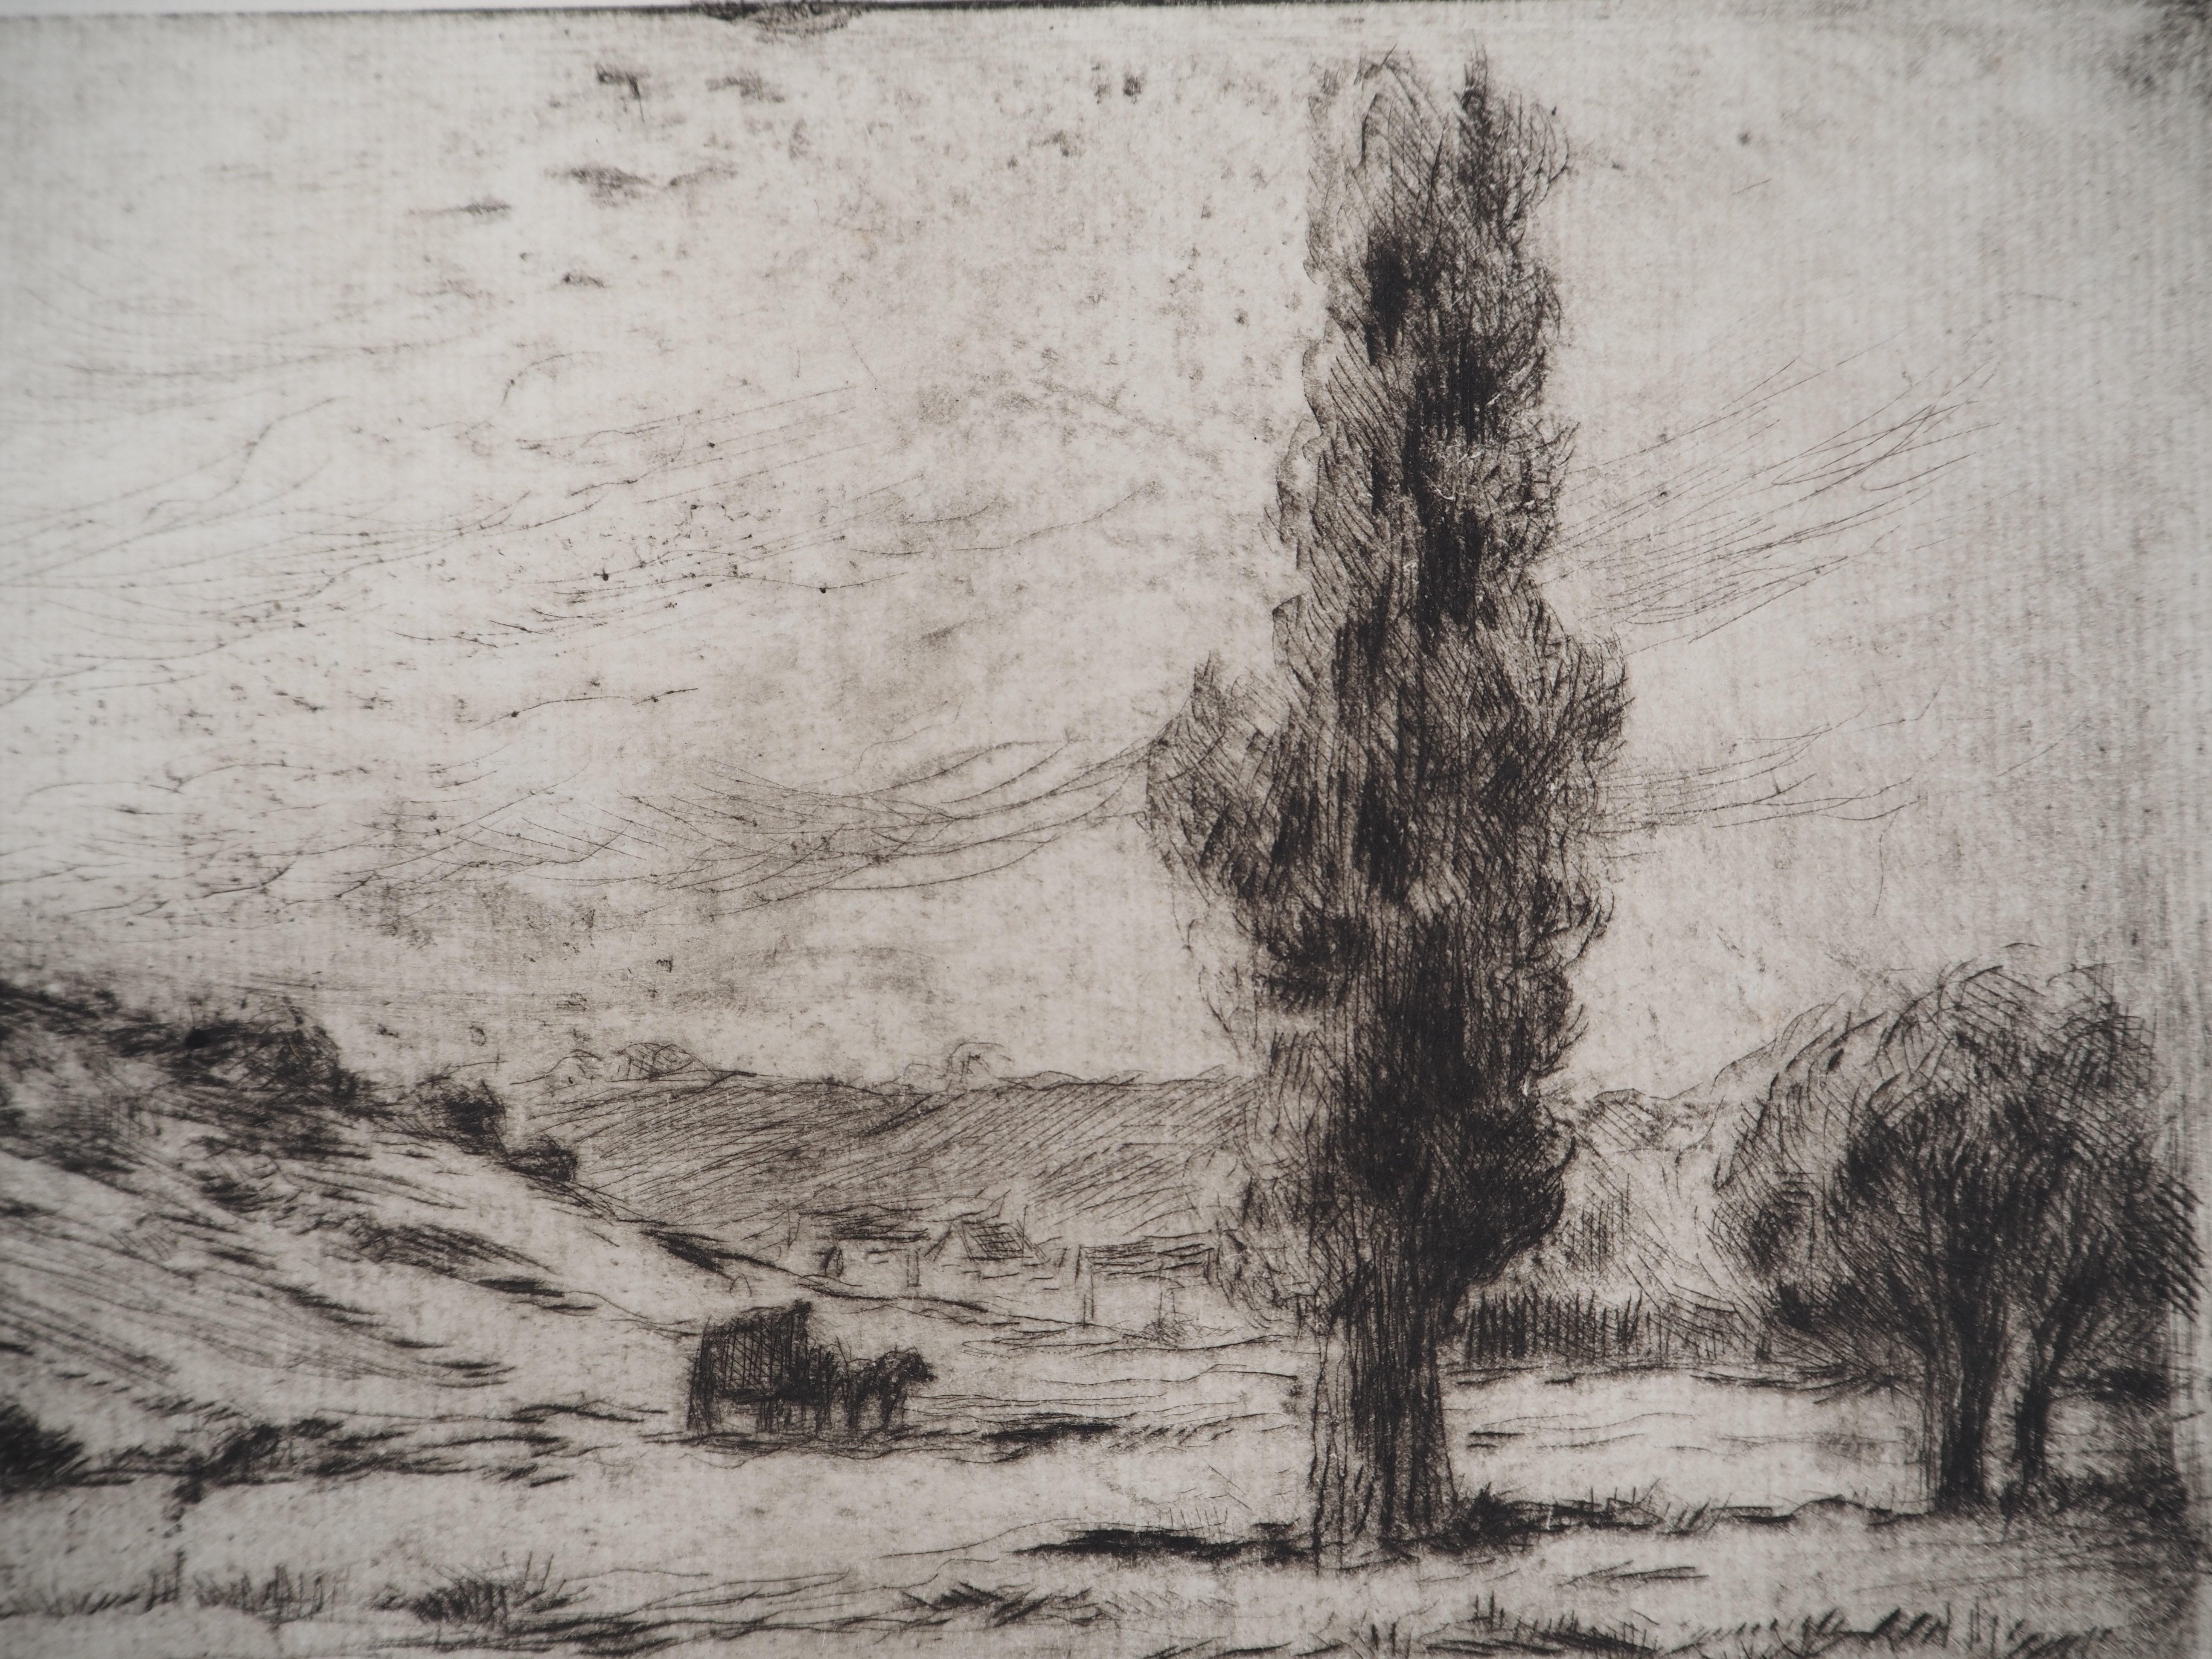 Artwork by Maximilien Luce, Countryside landscape, Made of drypoint etching on laid paper